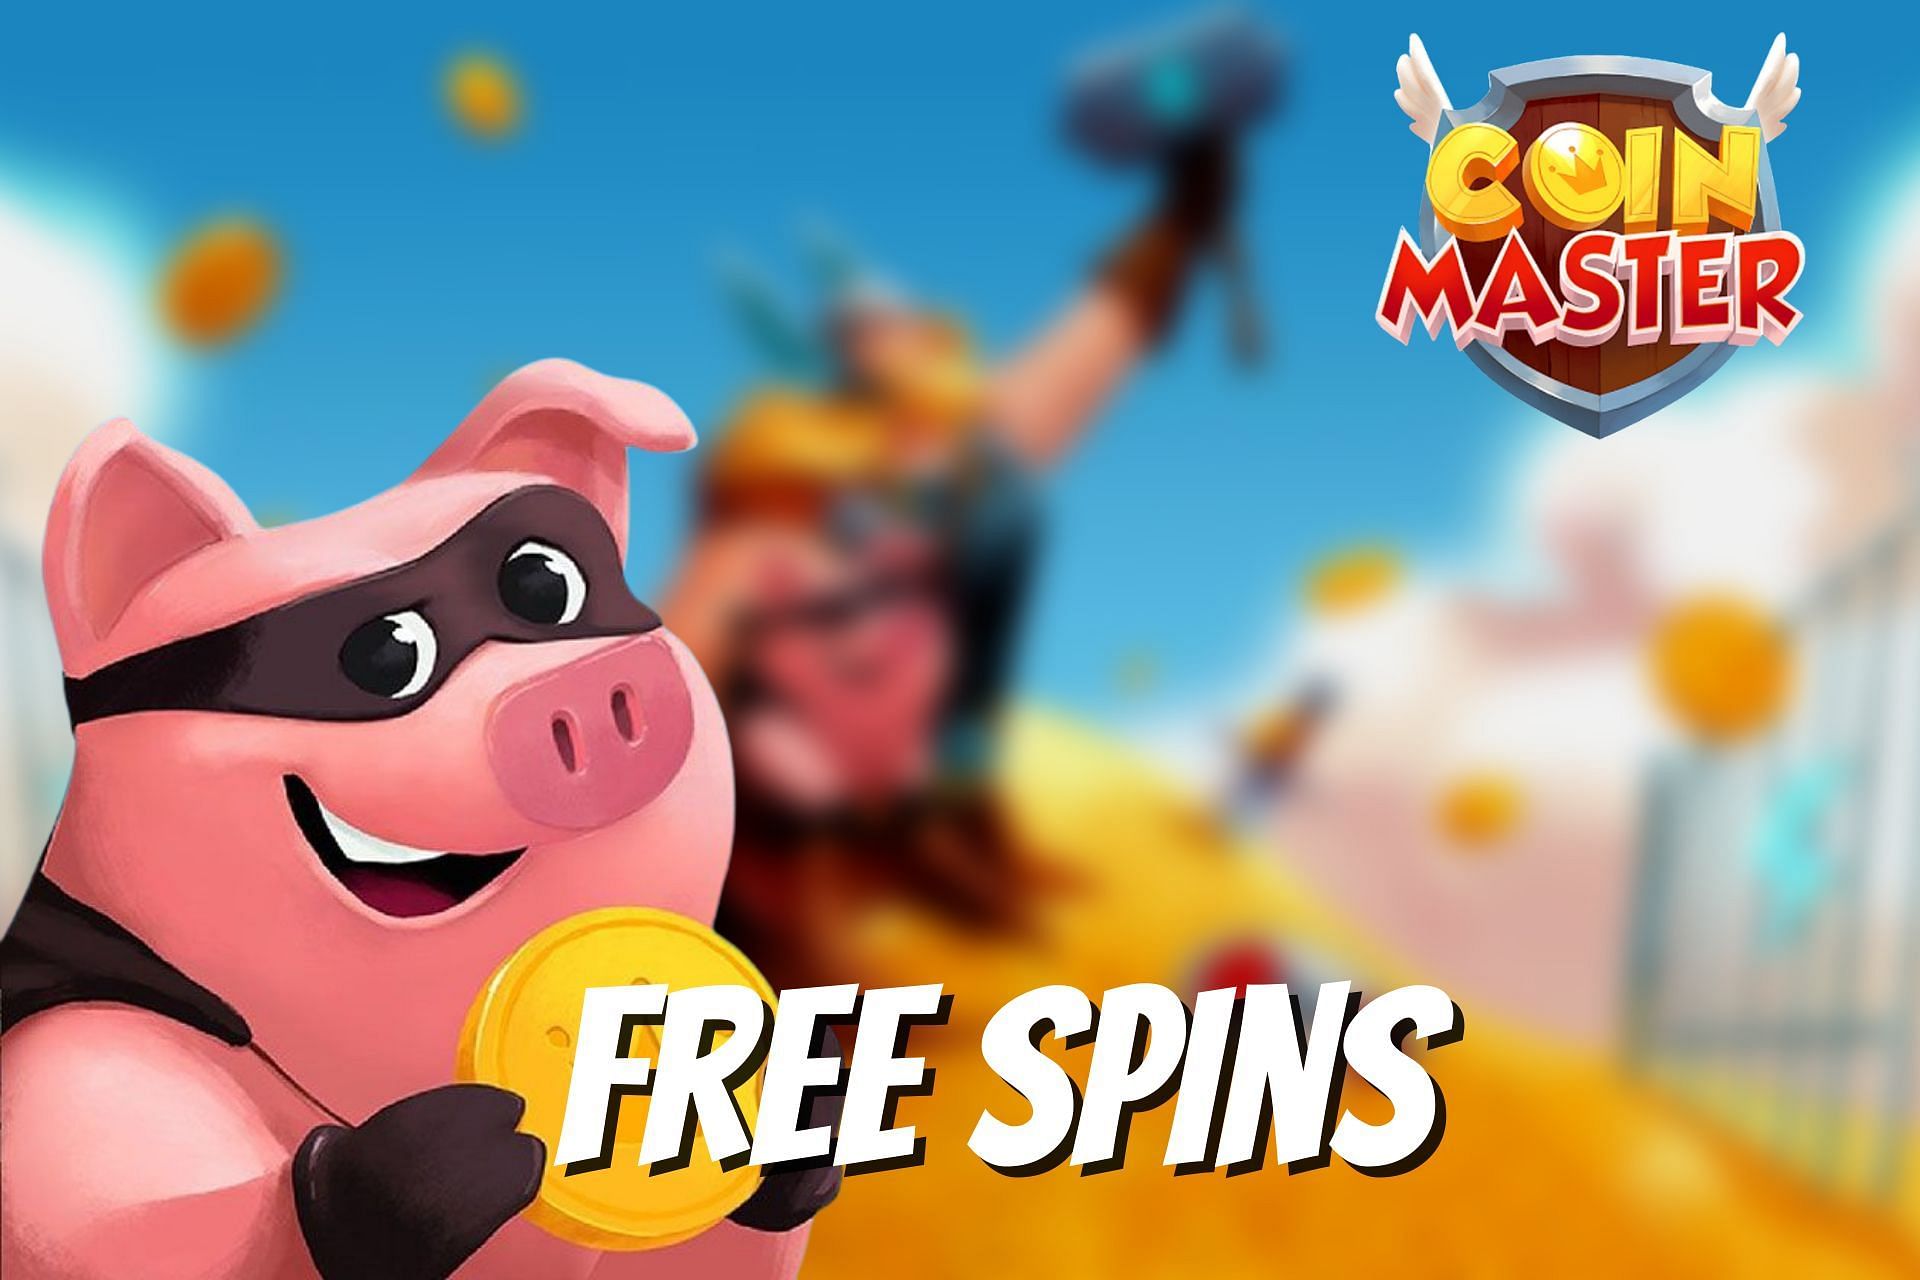 Get free spins by clicking the Twitter link (Image via Sportskeeda)